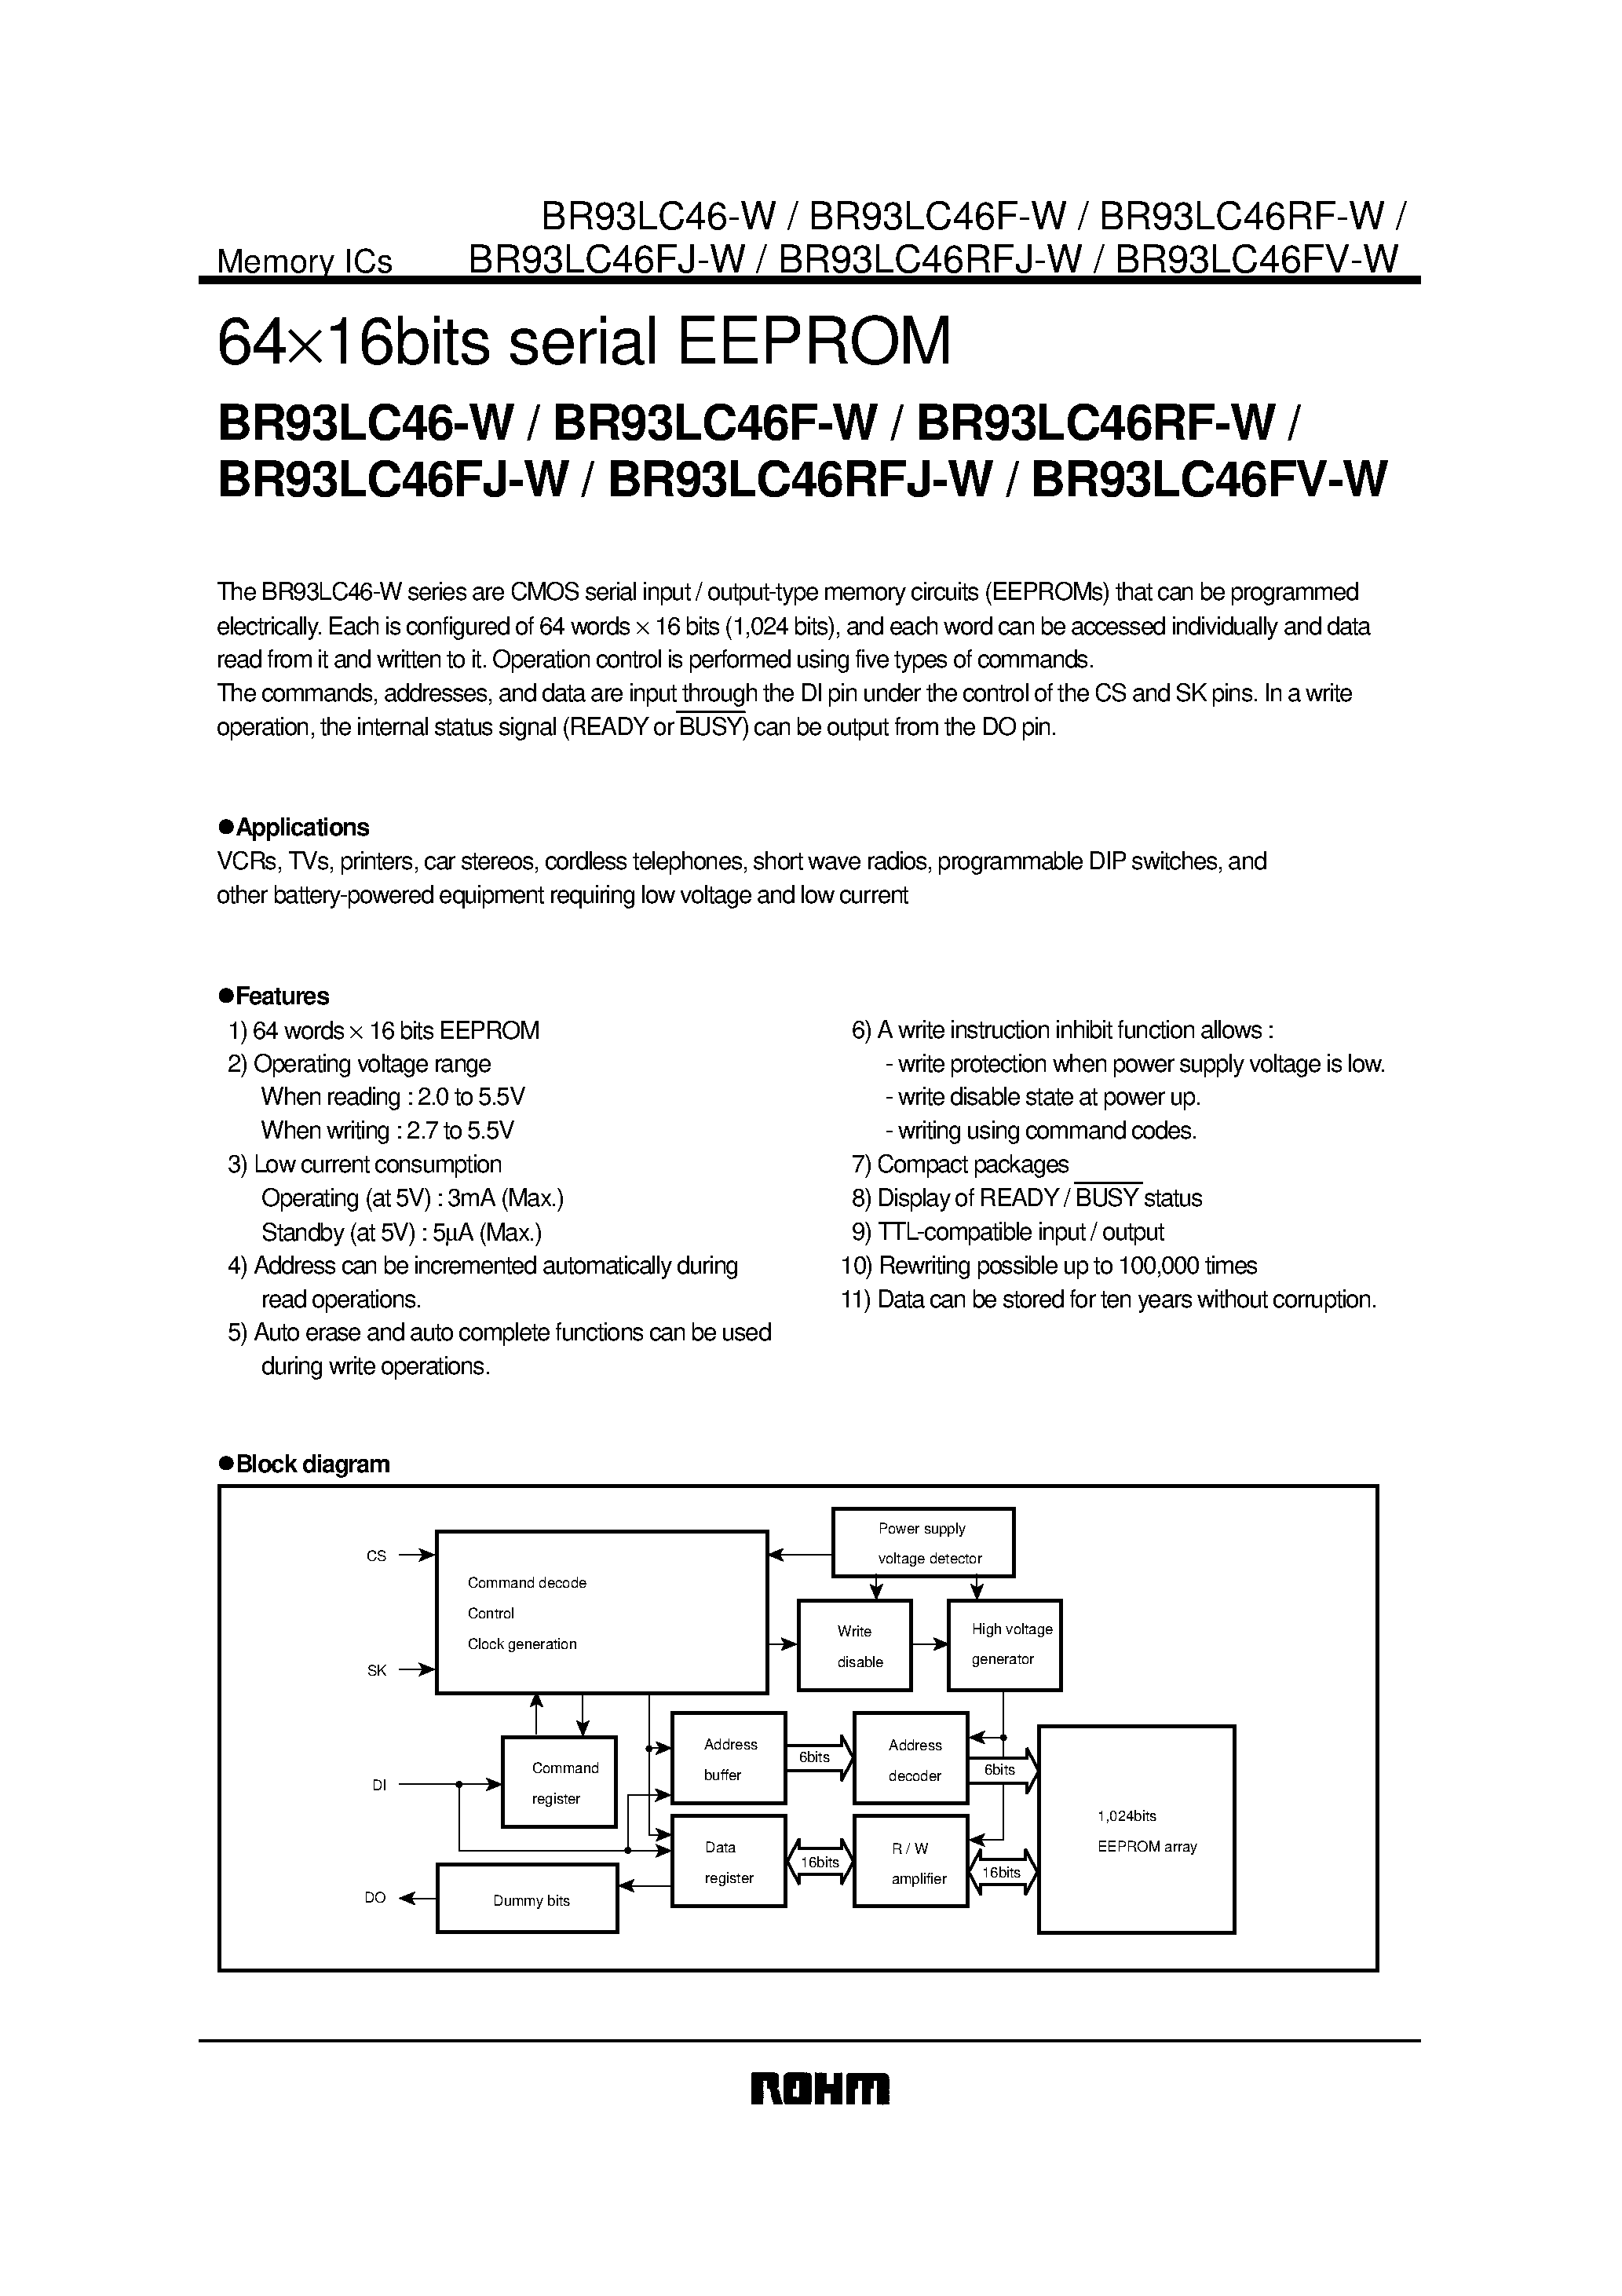 Datasheet BR93LC46-W - 6416bits serial EEPROM page 1